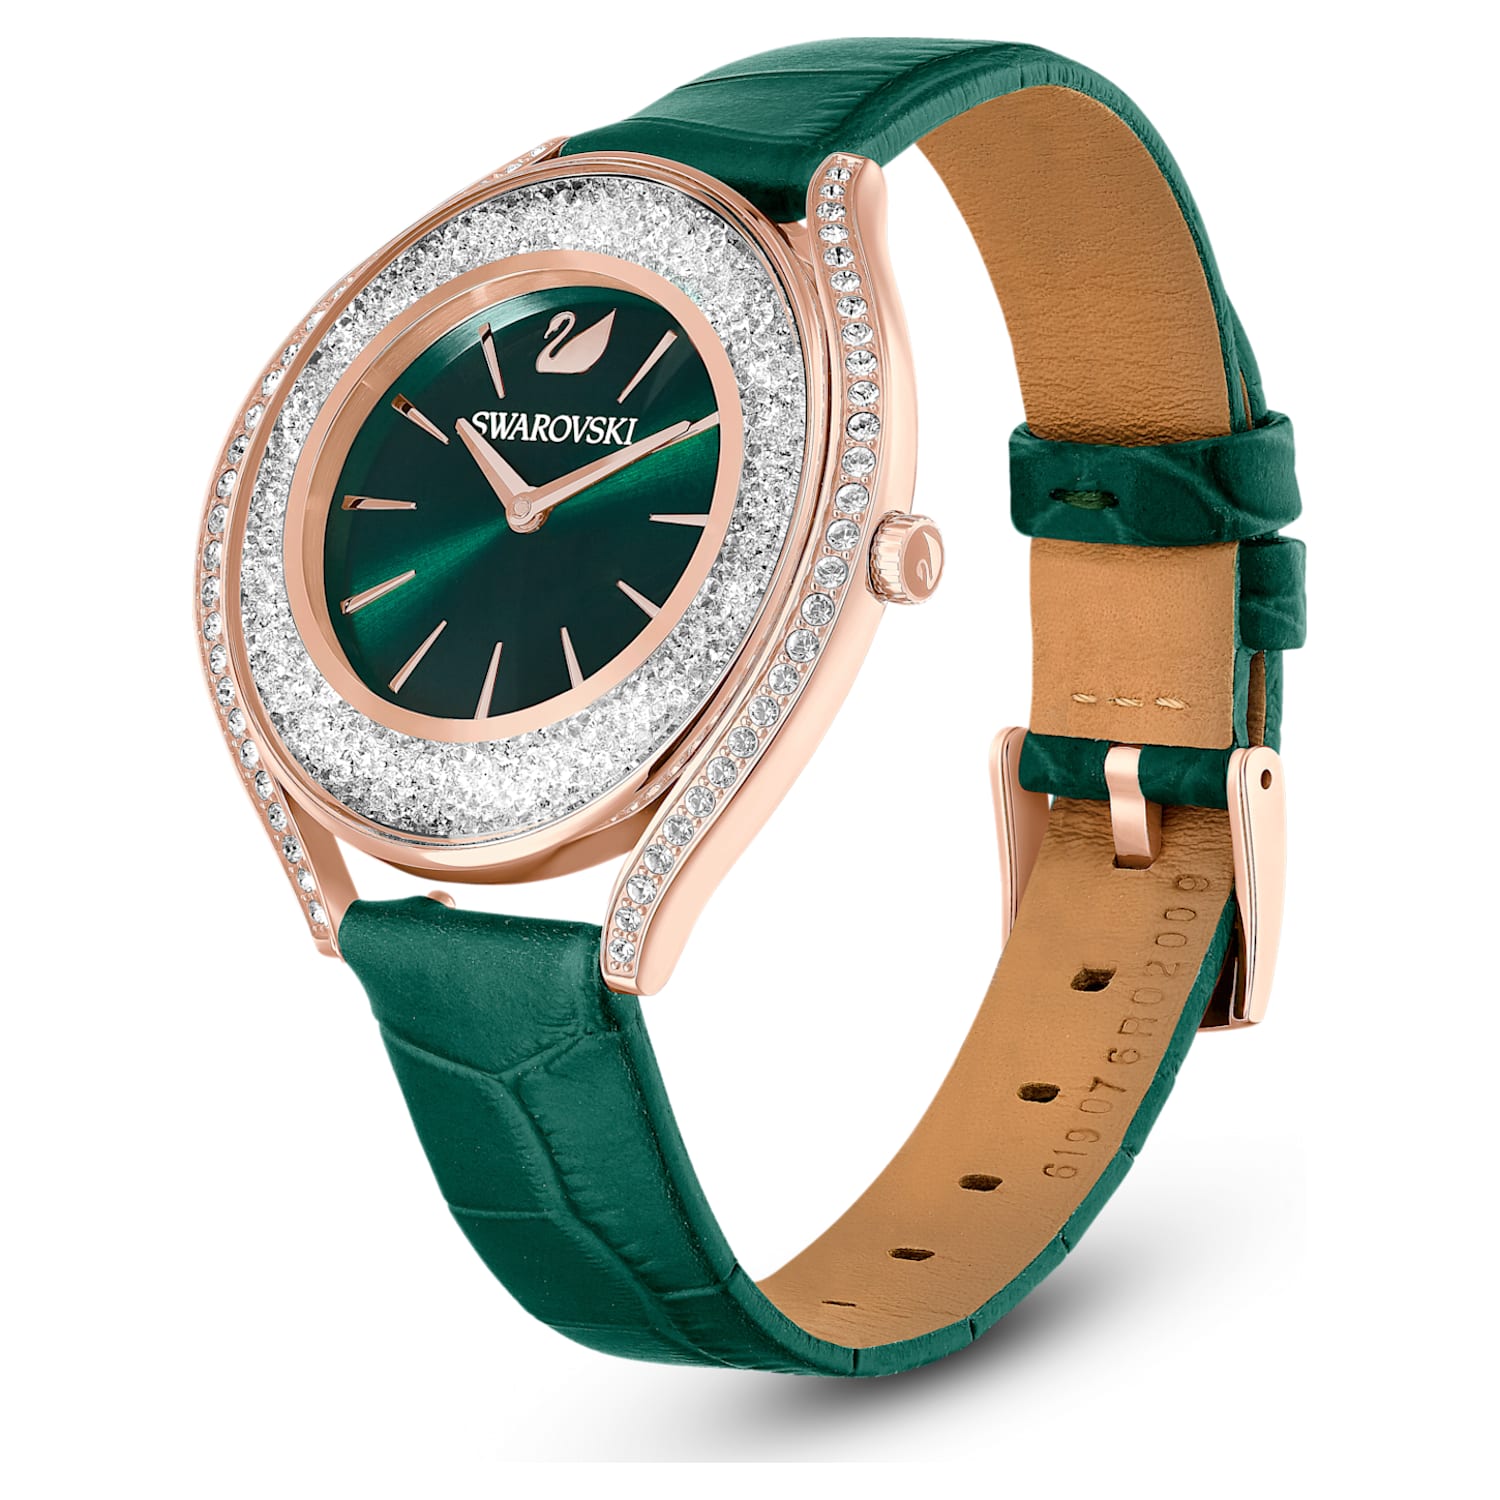 Crystalline Aura watch Swiss Made Leather strap Green Rose goldtone  finish